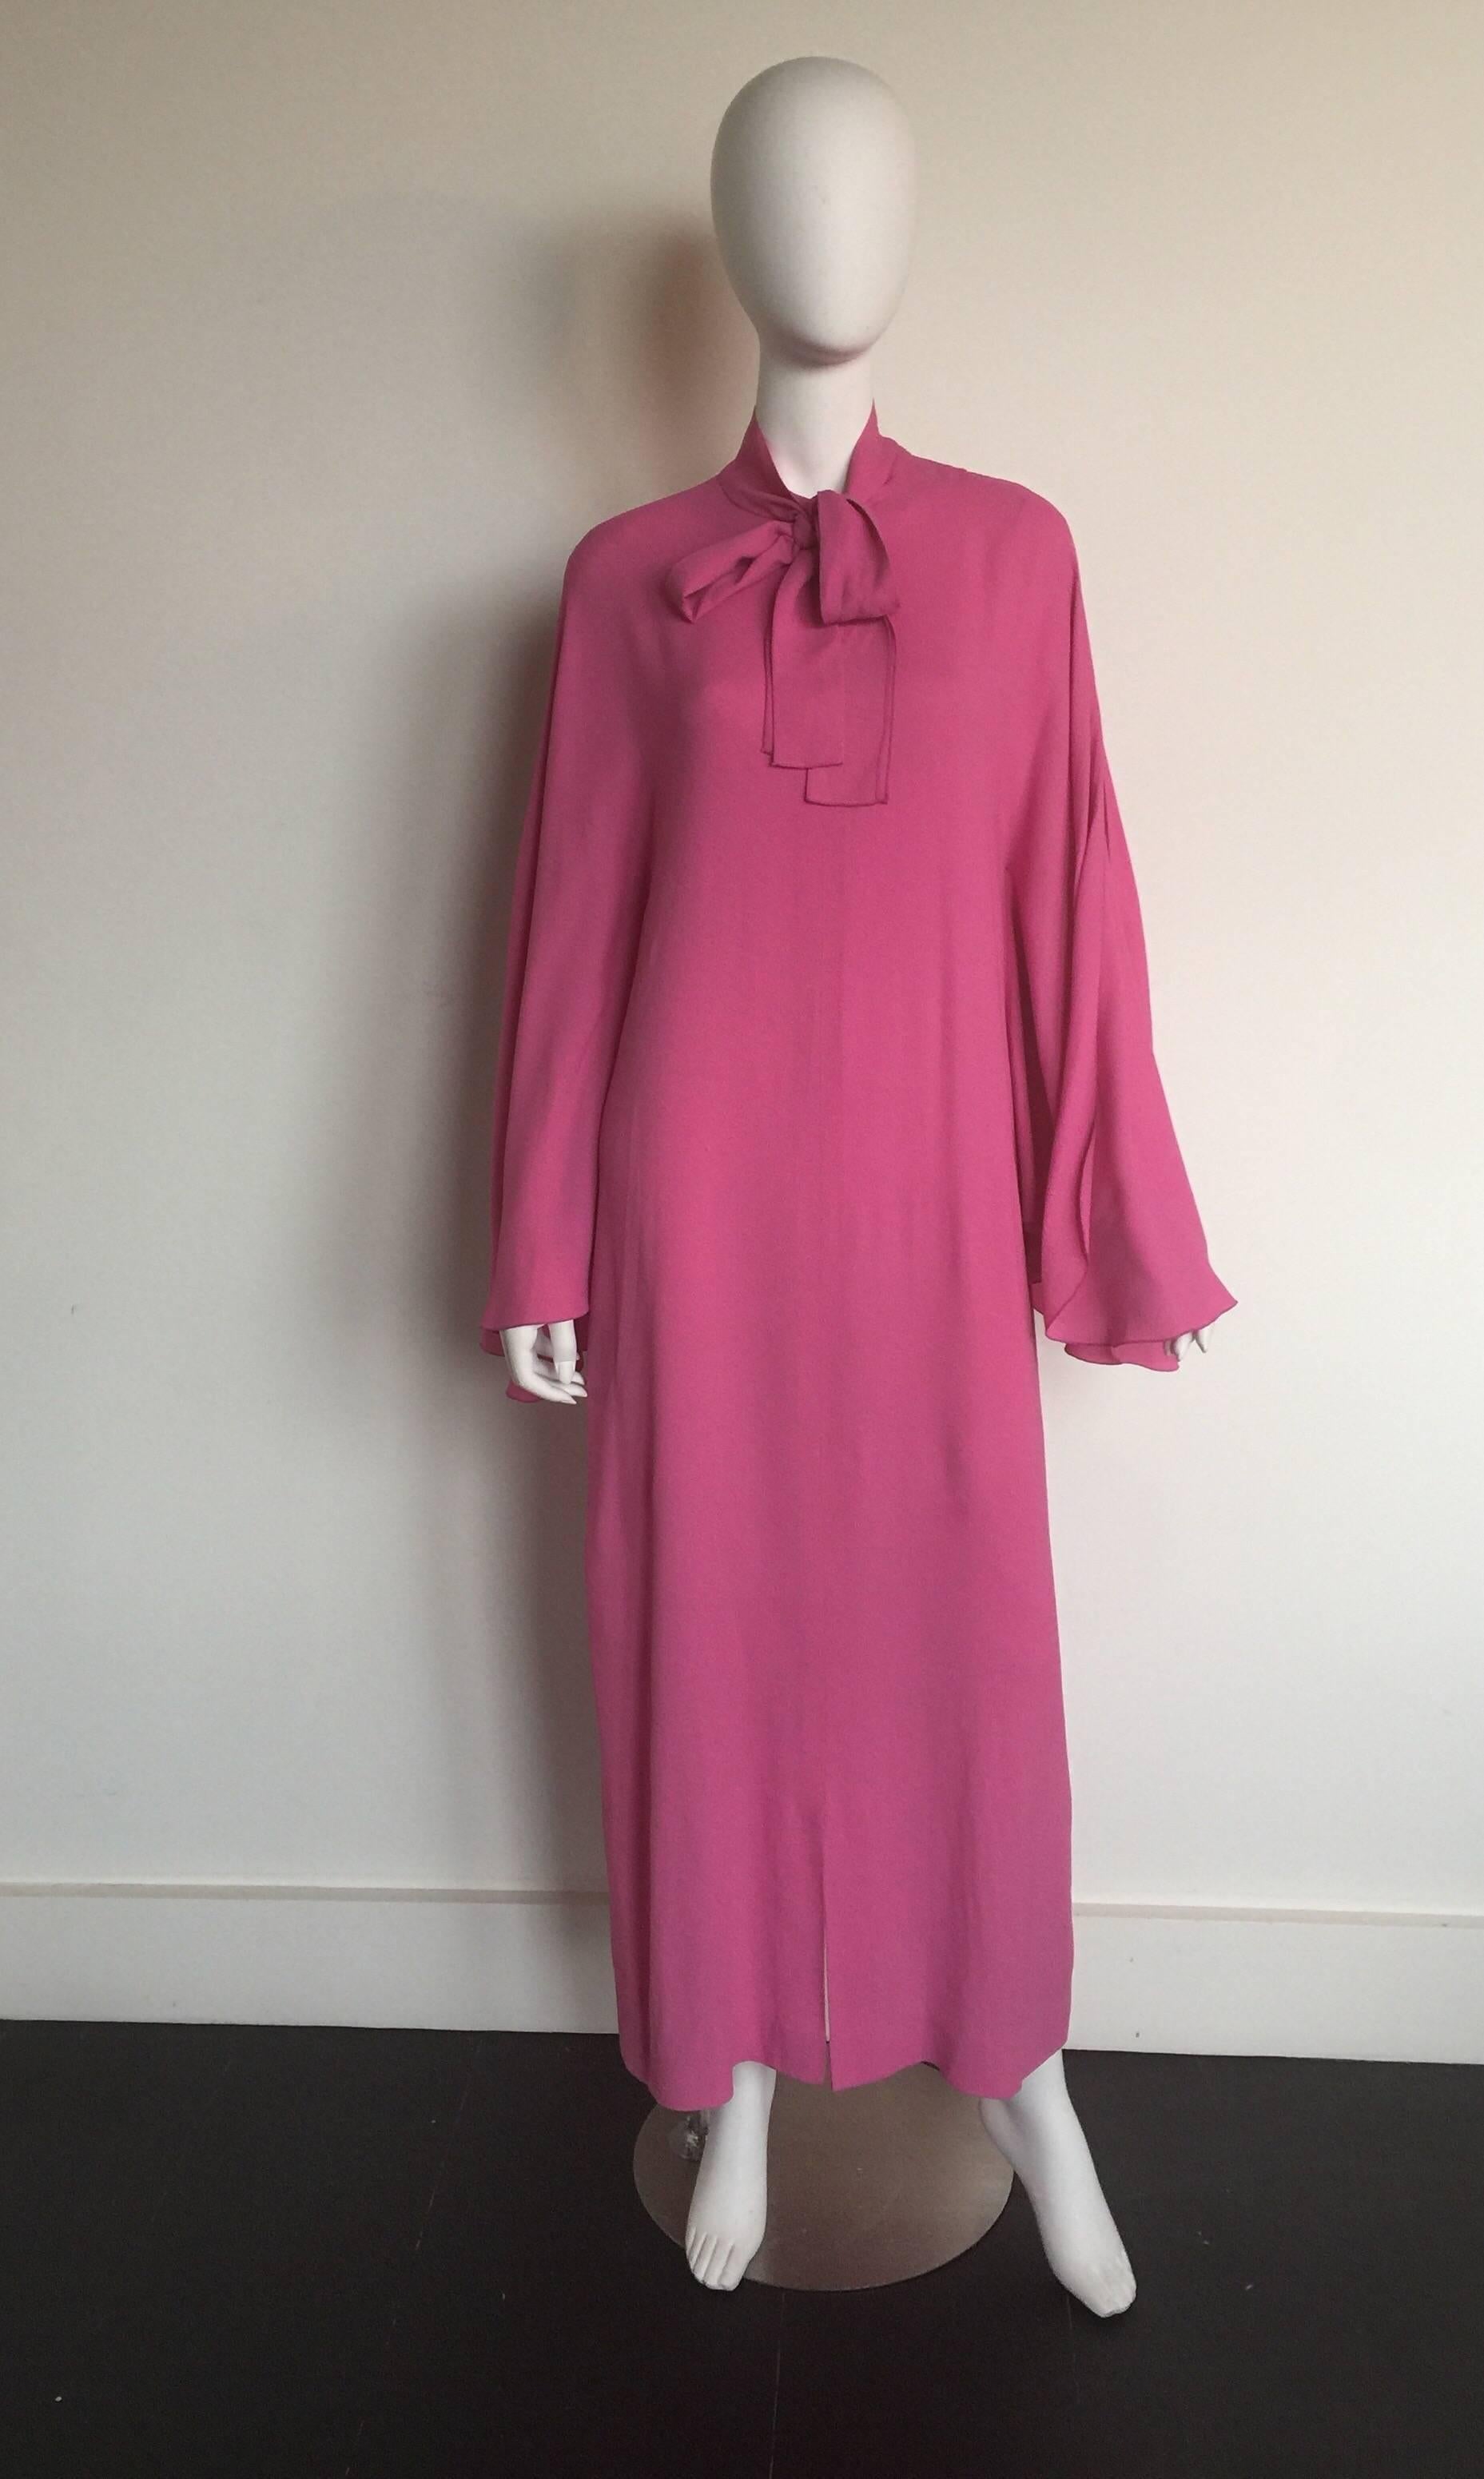 This Pierre Cardin caftan is from the 1960s. This pink caftan has a high neck with oversized bow. The flutter sleeves have a scalloped hem. There is a small front slit and a back zipper enclosure.

BUST: 40" 
WAIST: FREE WAIST 
HIP: FREE HIP